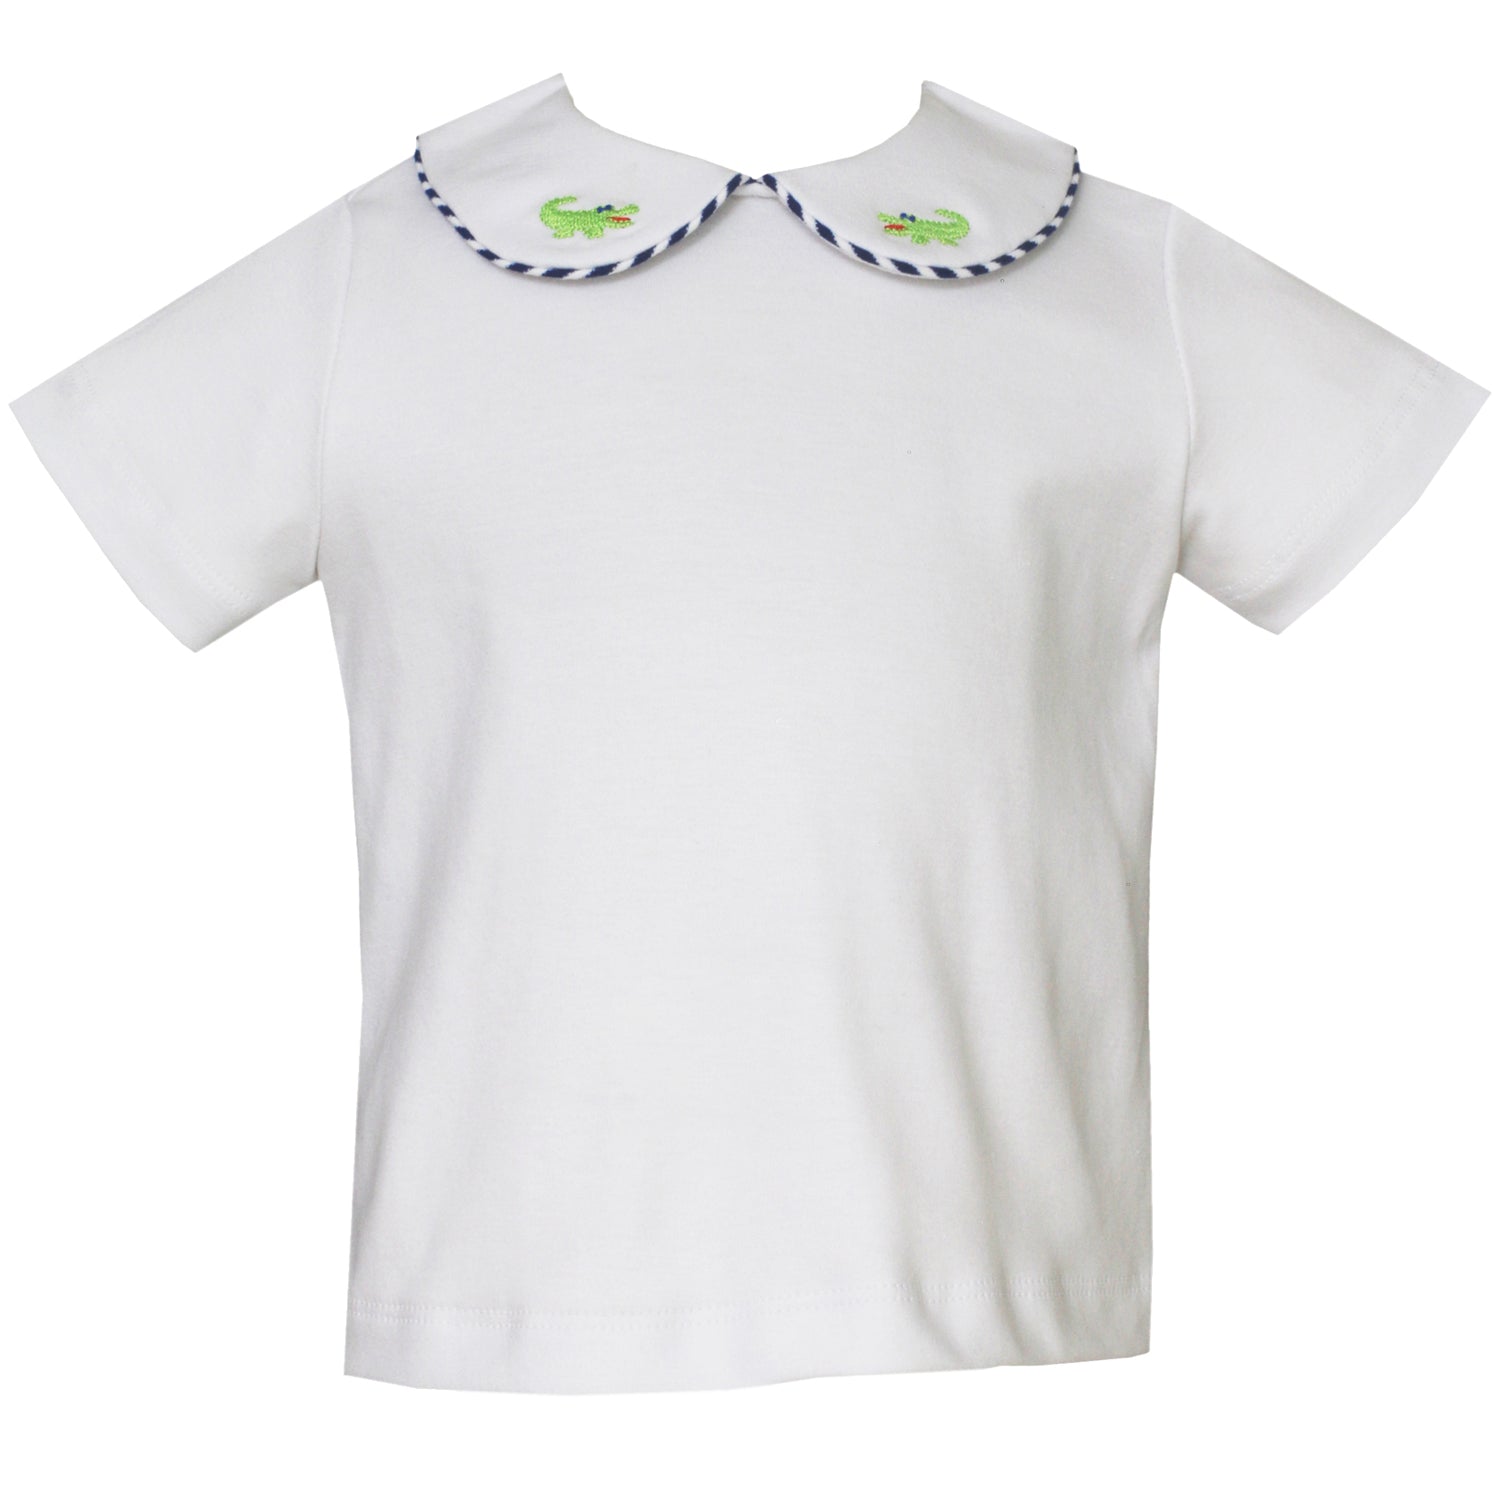 White Peter Pan Collar Shirt With Embroidered Alligators